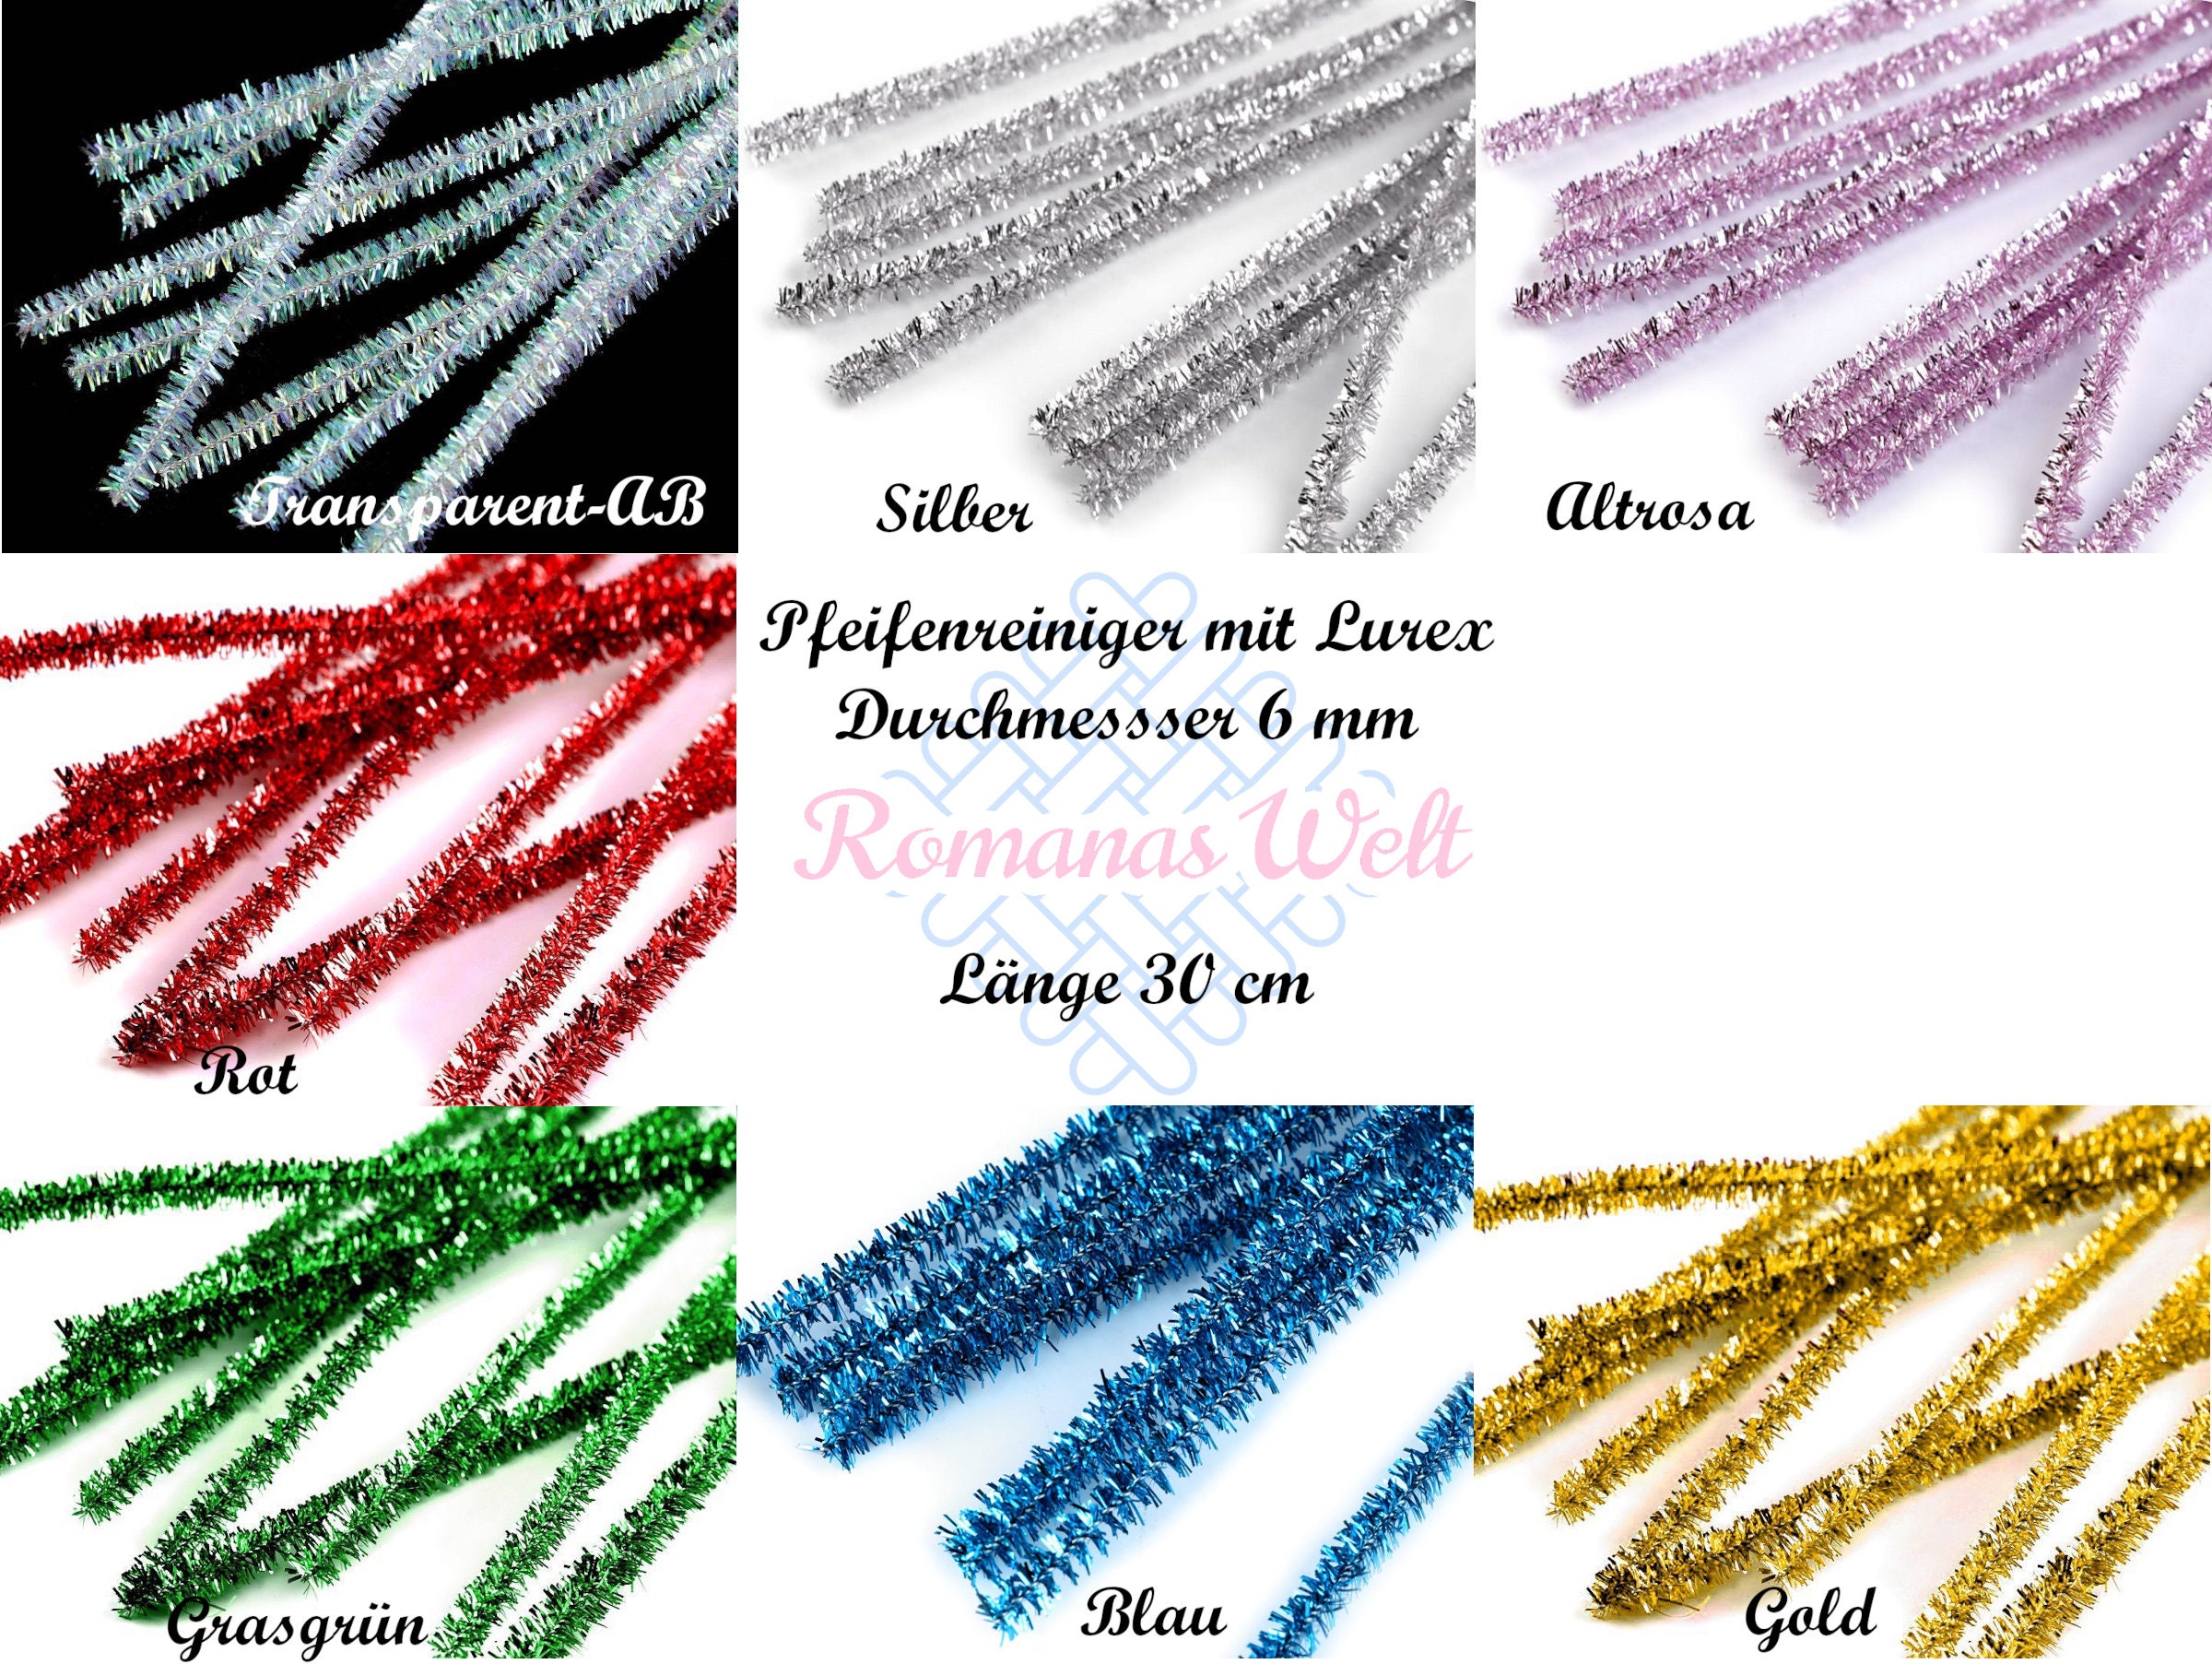 Chenille Stems 100 Pack (Pipe Cleaners)